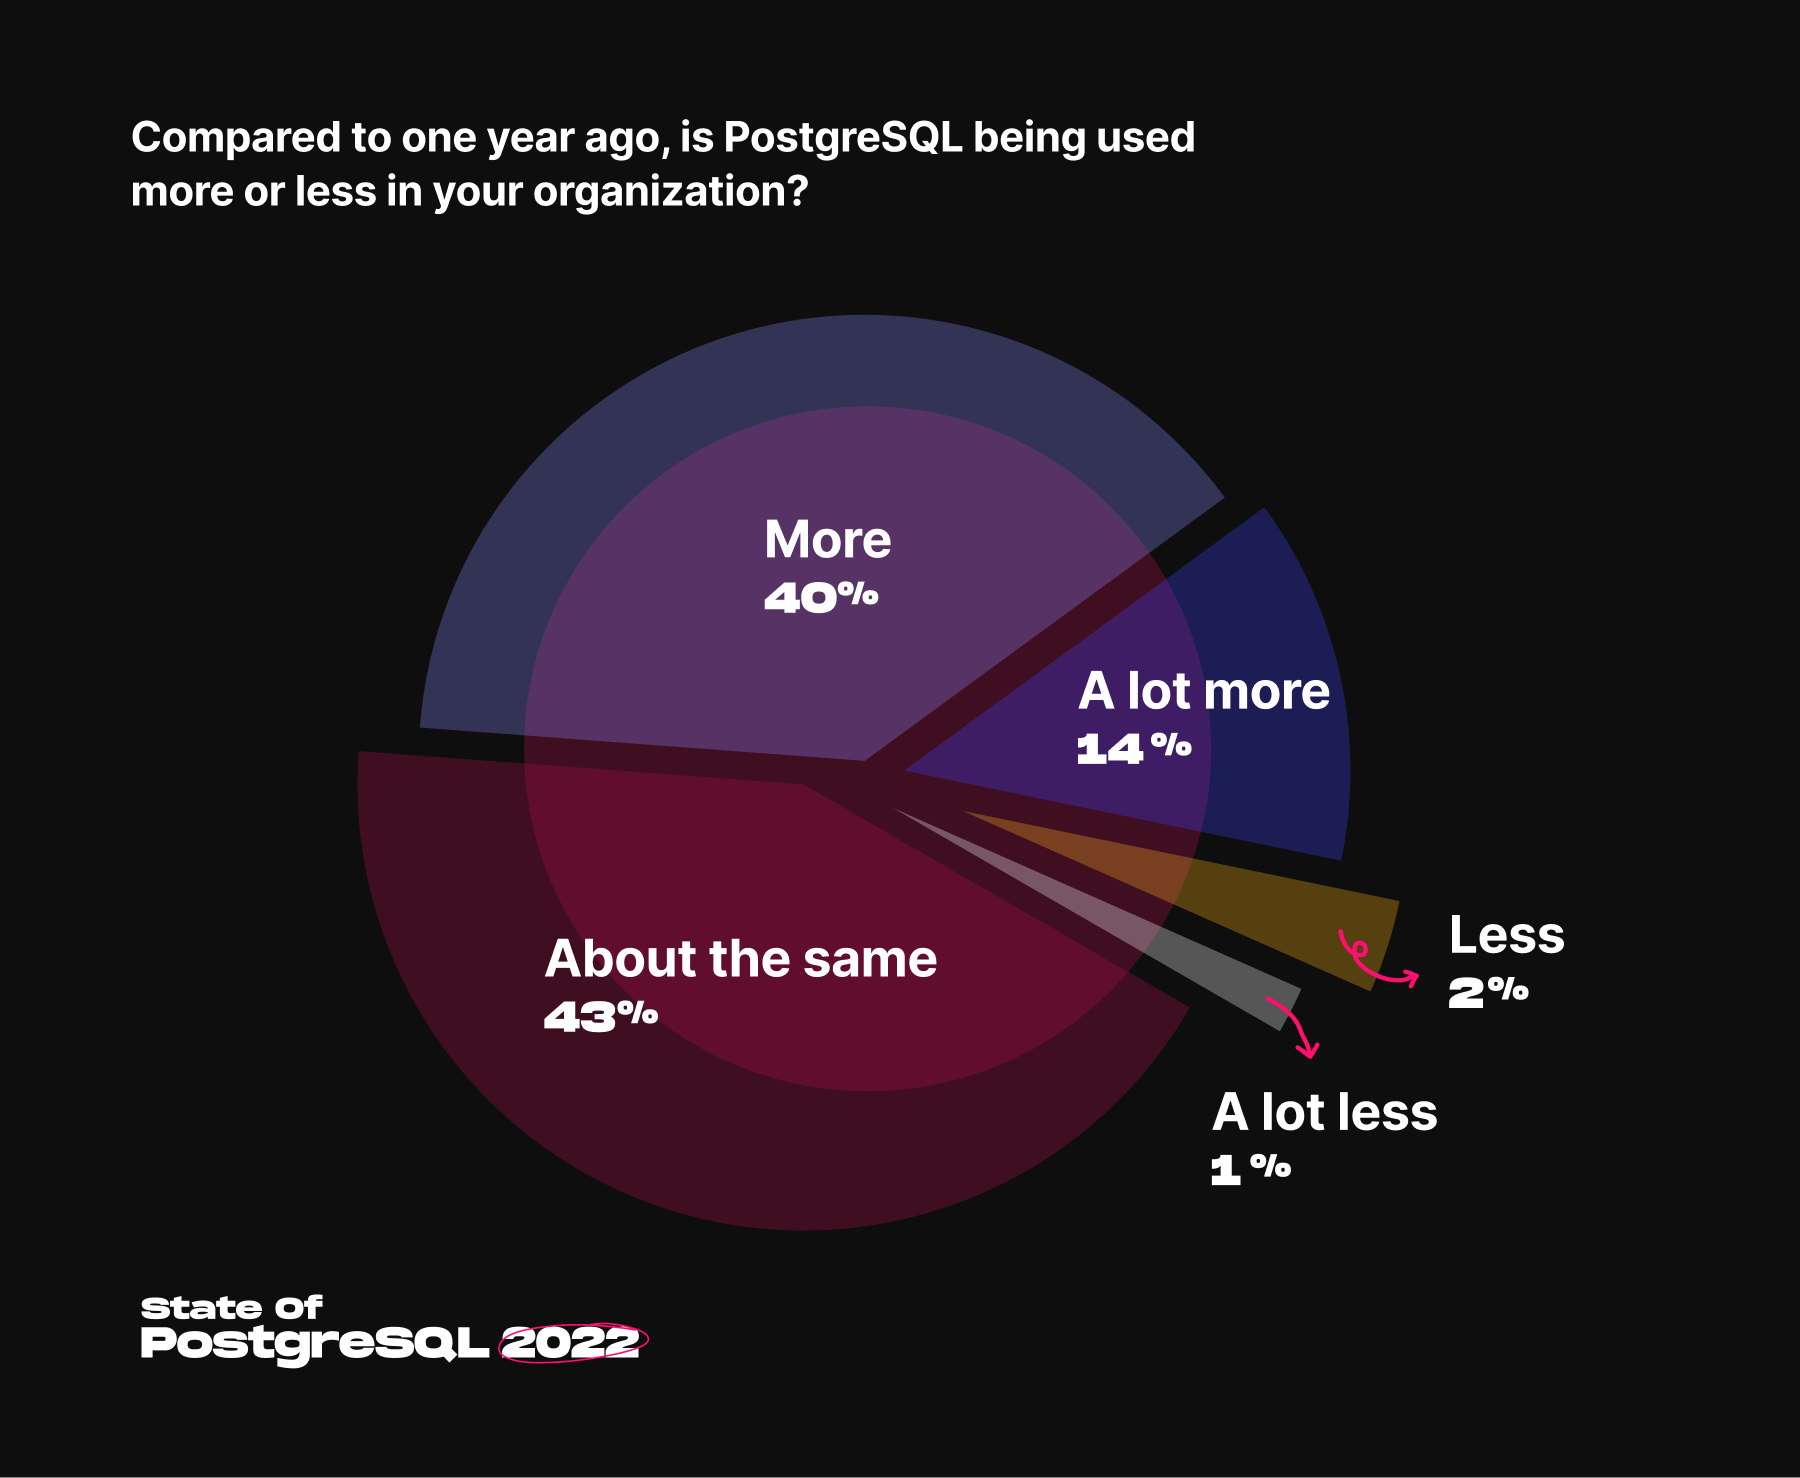 A pie chart displaying the percentage usage of PostgreSQL in the respondent's organizations